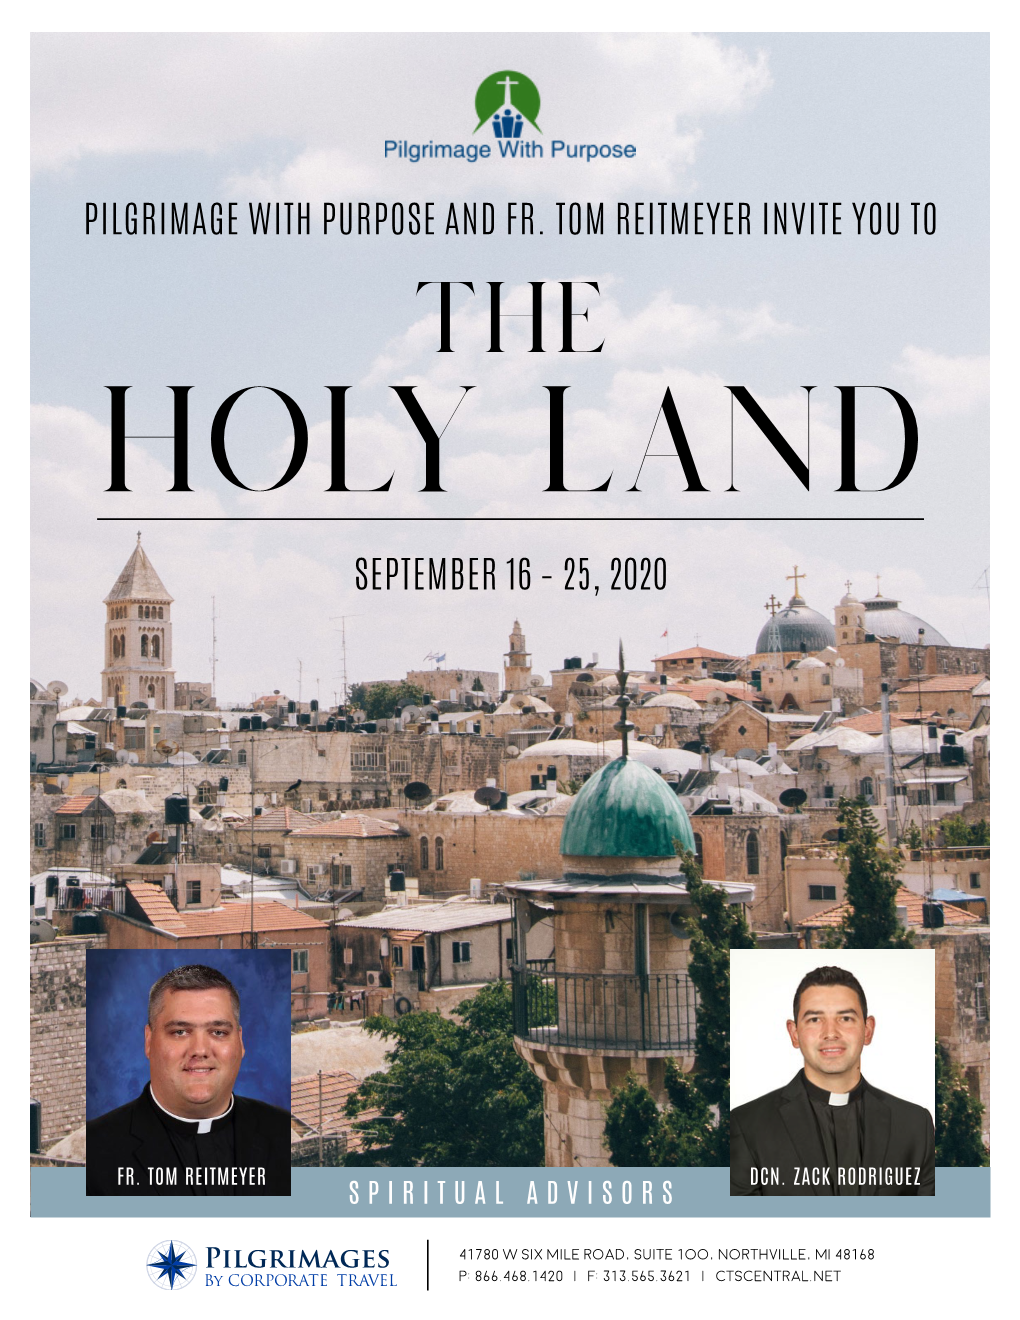 Pilgrimage with Purpose and Fr. Tom Reitmeyer Invite You to the Holy Land September 16 – 25, 2020